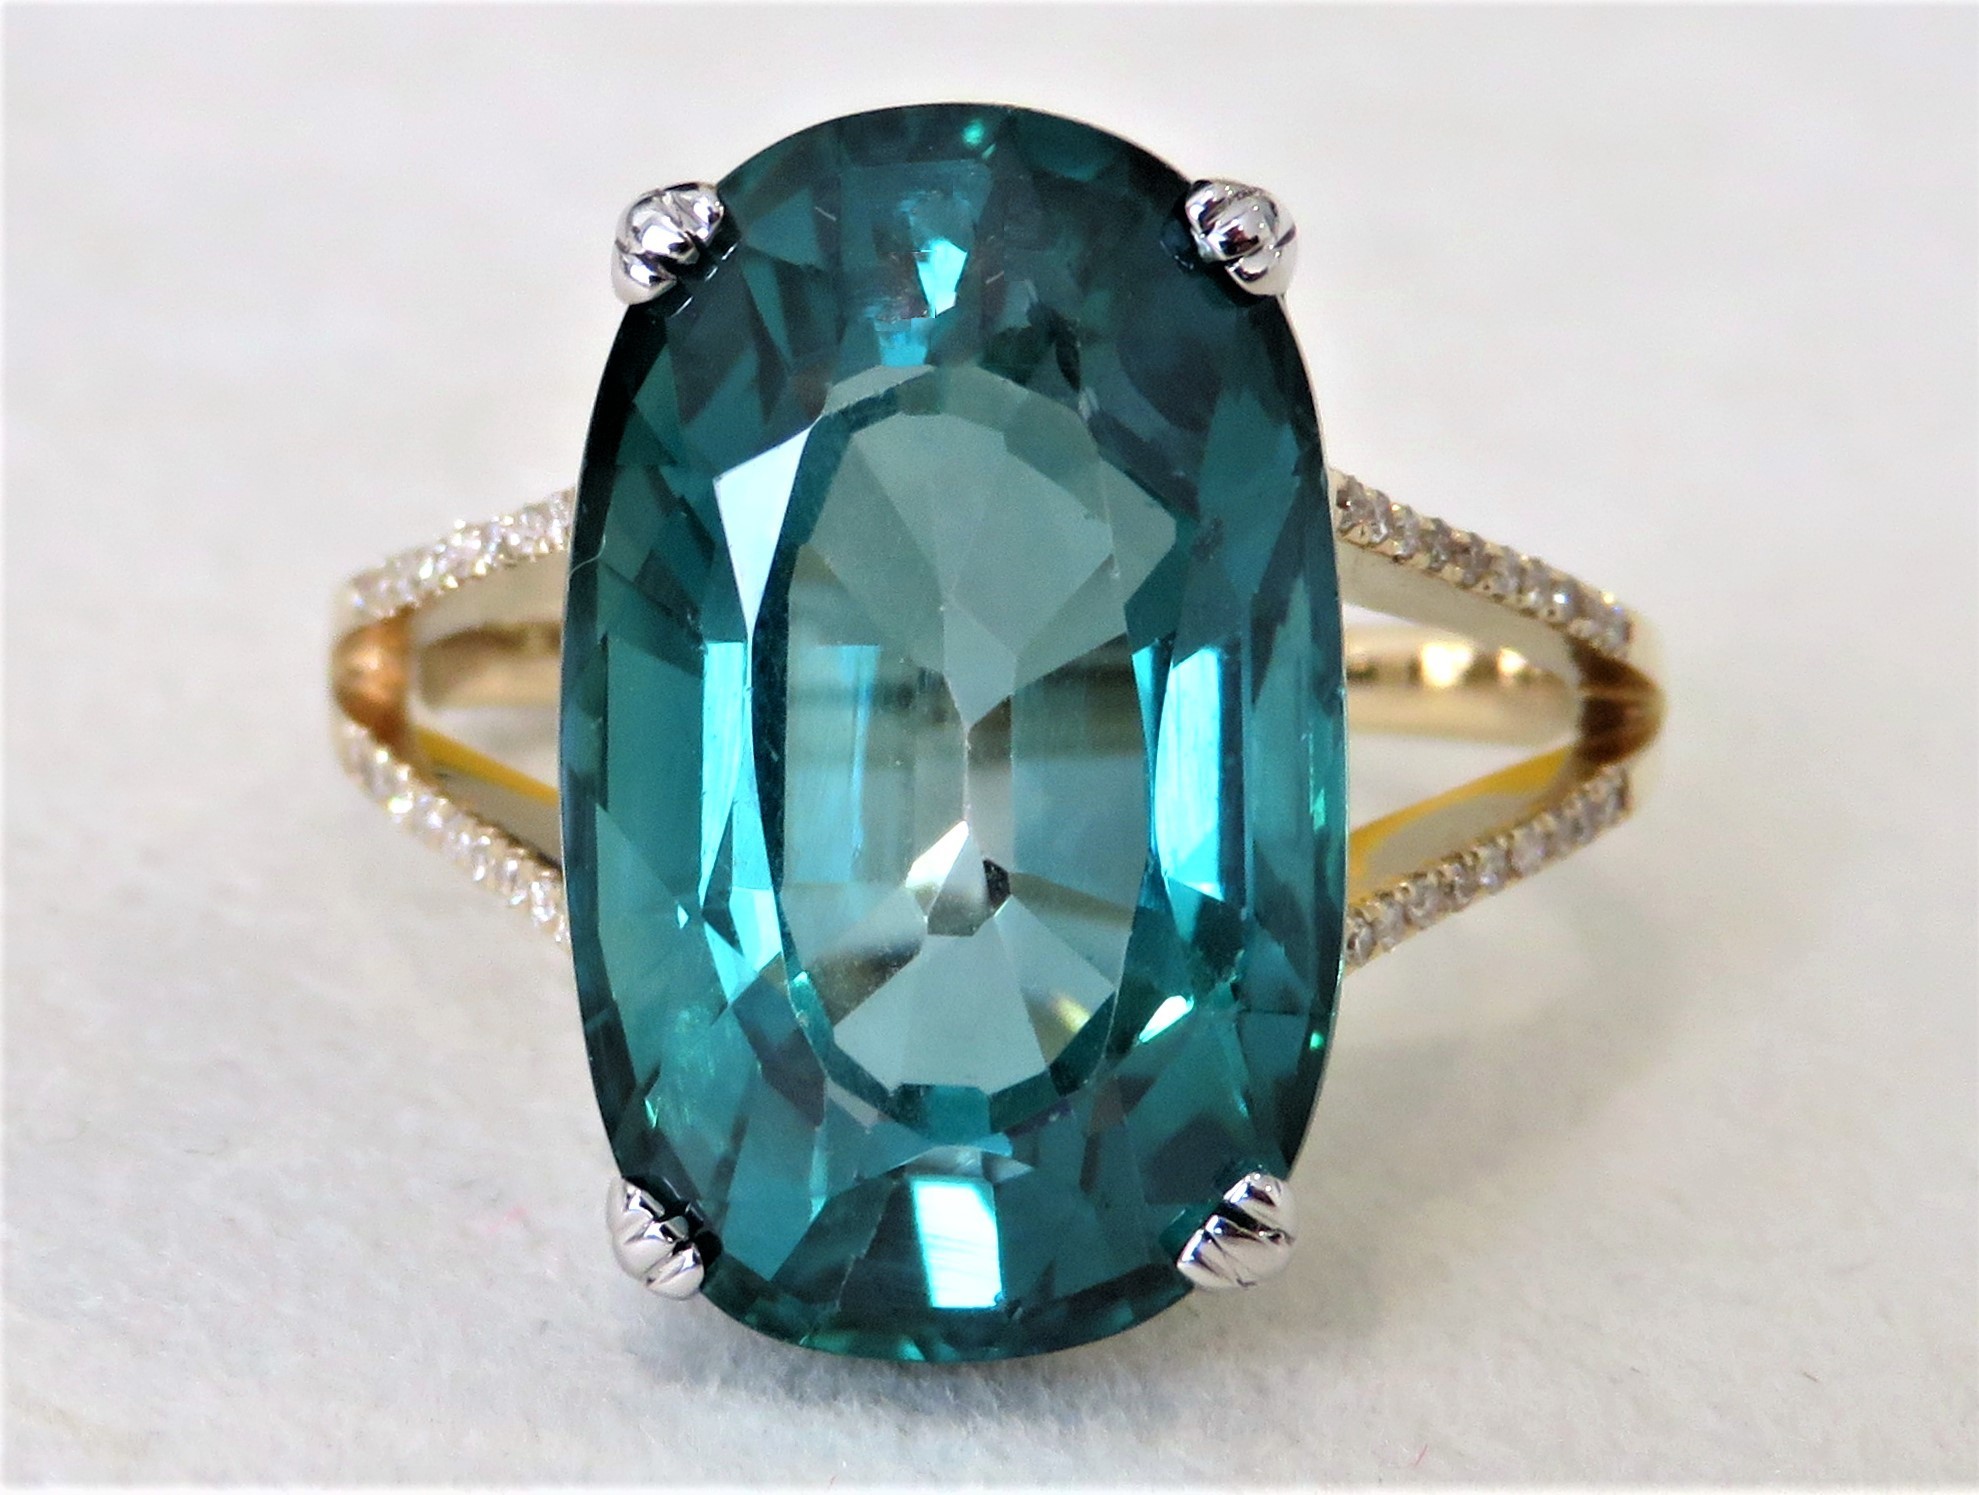 14k Yellow/White Gold 13.9ct Green Topaz & 0.25ct Diamond Ring with Valuation